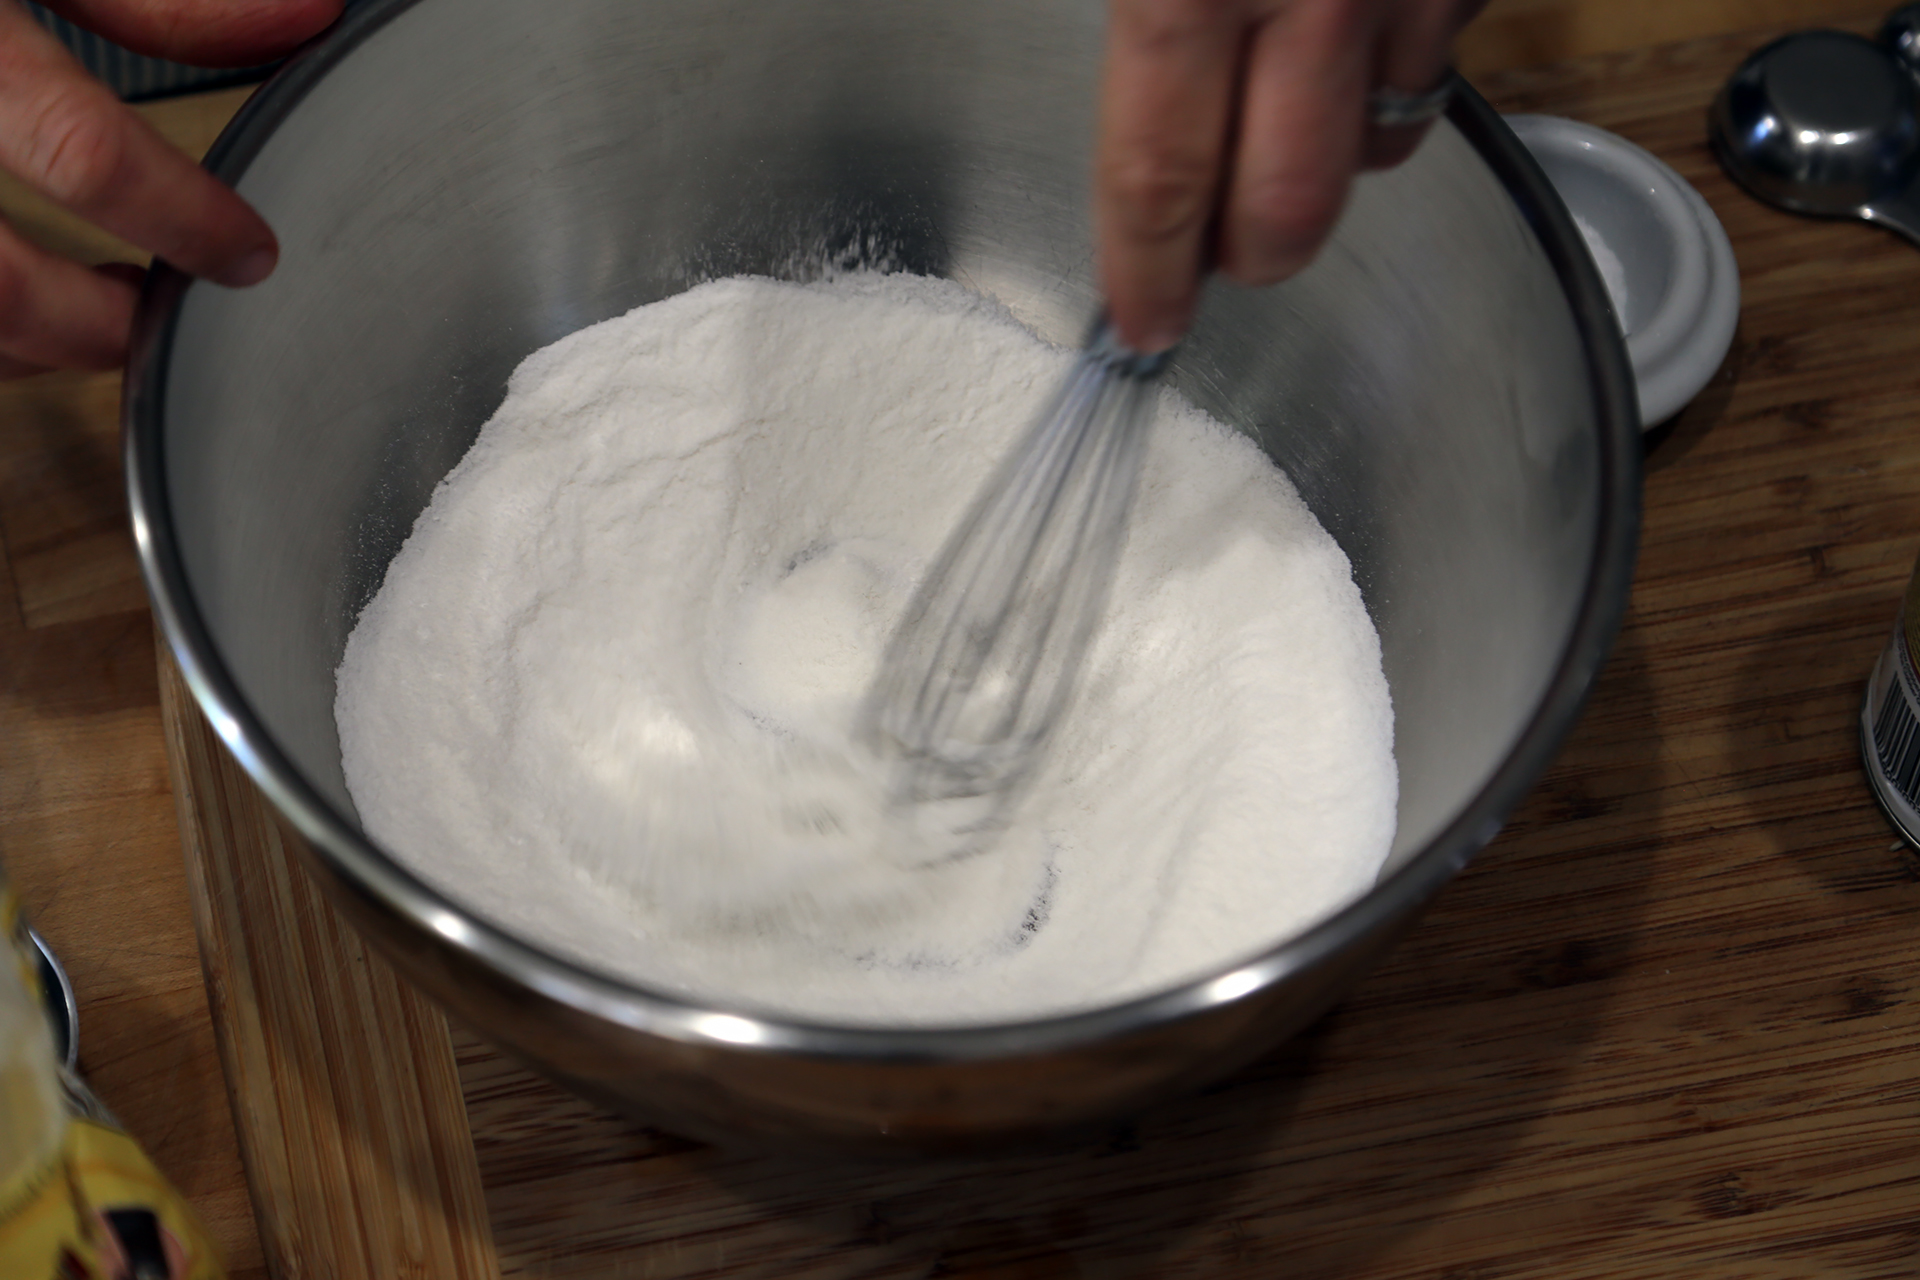 In a large, shallow bowl, whisk together the rice flour, baking powder, and salt.